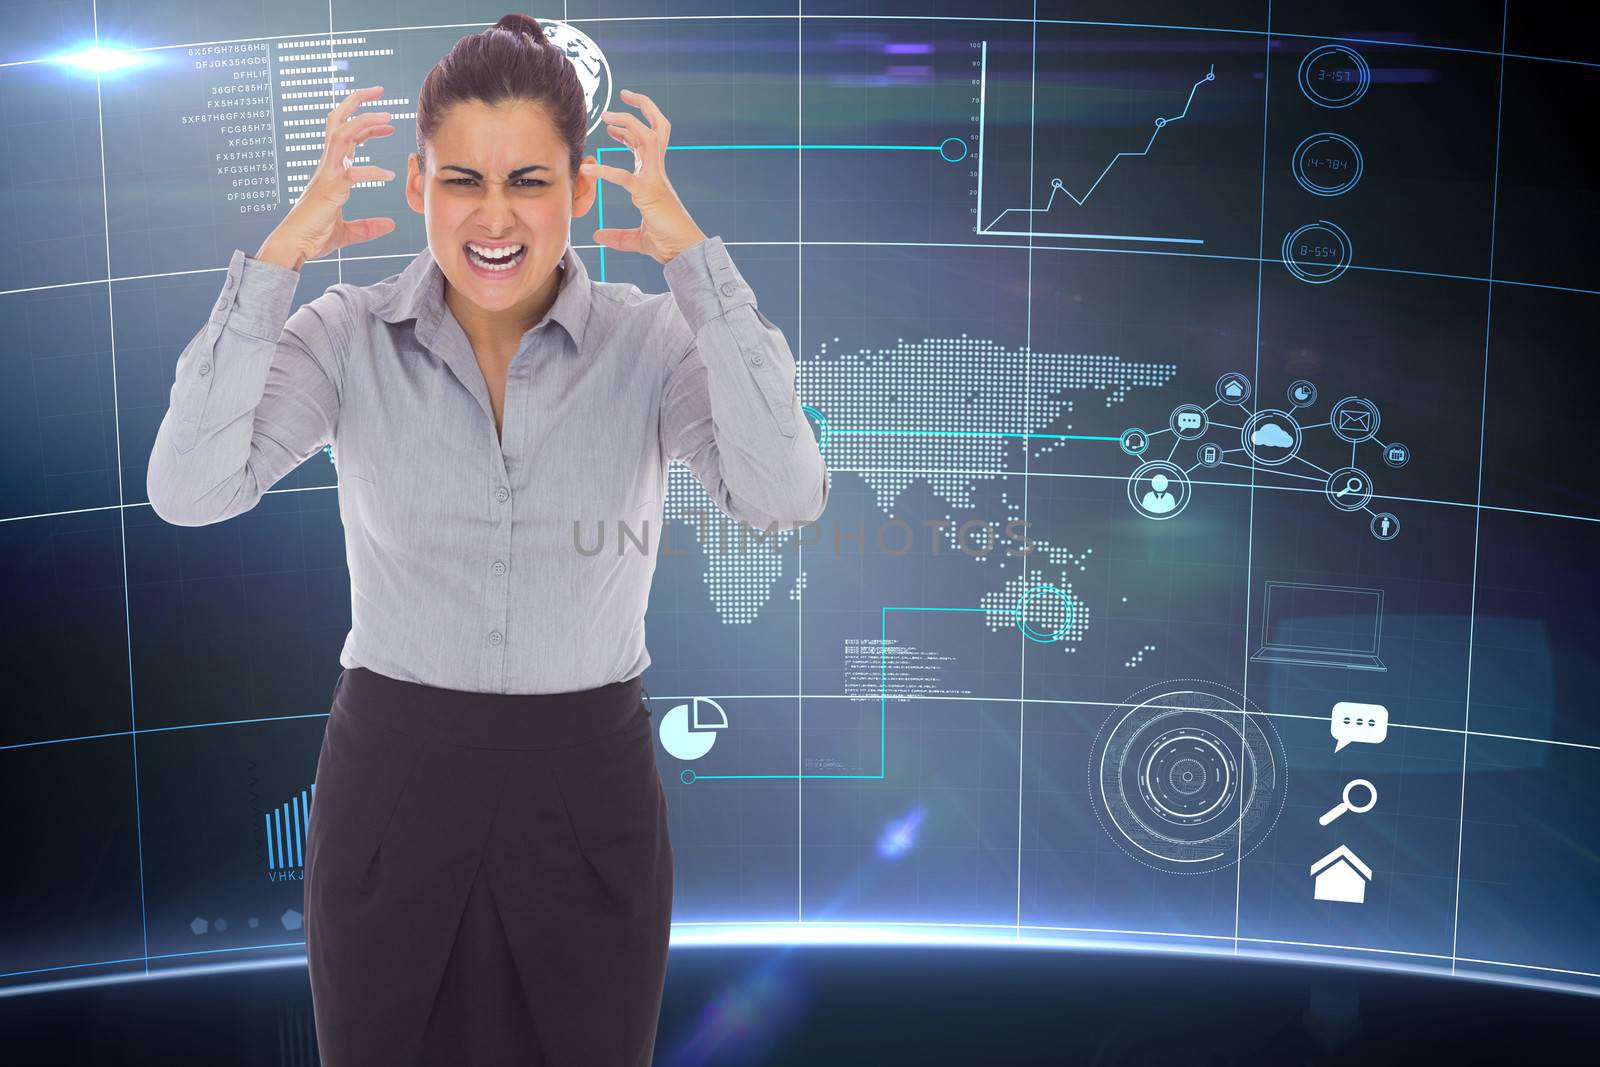 Frustrated businesswoman shouting against futuristic technology interface